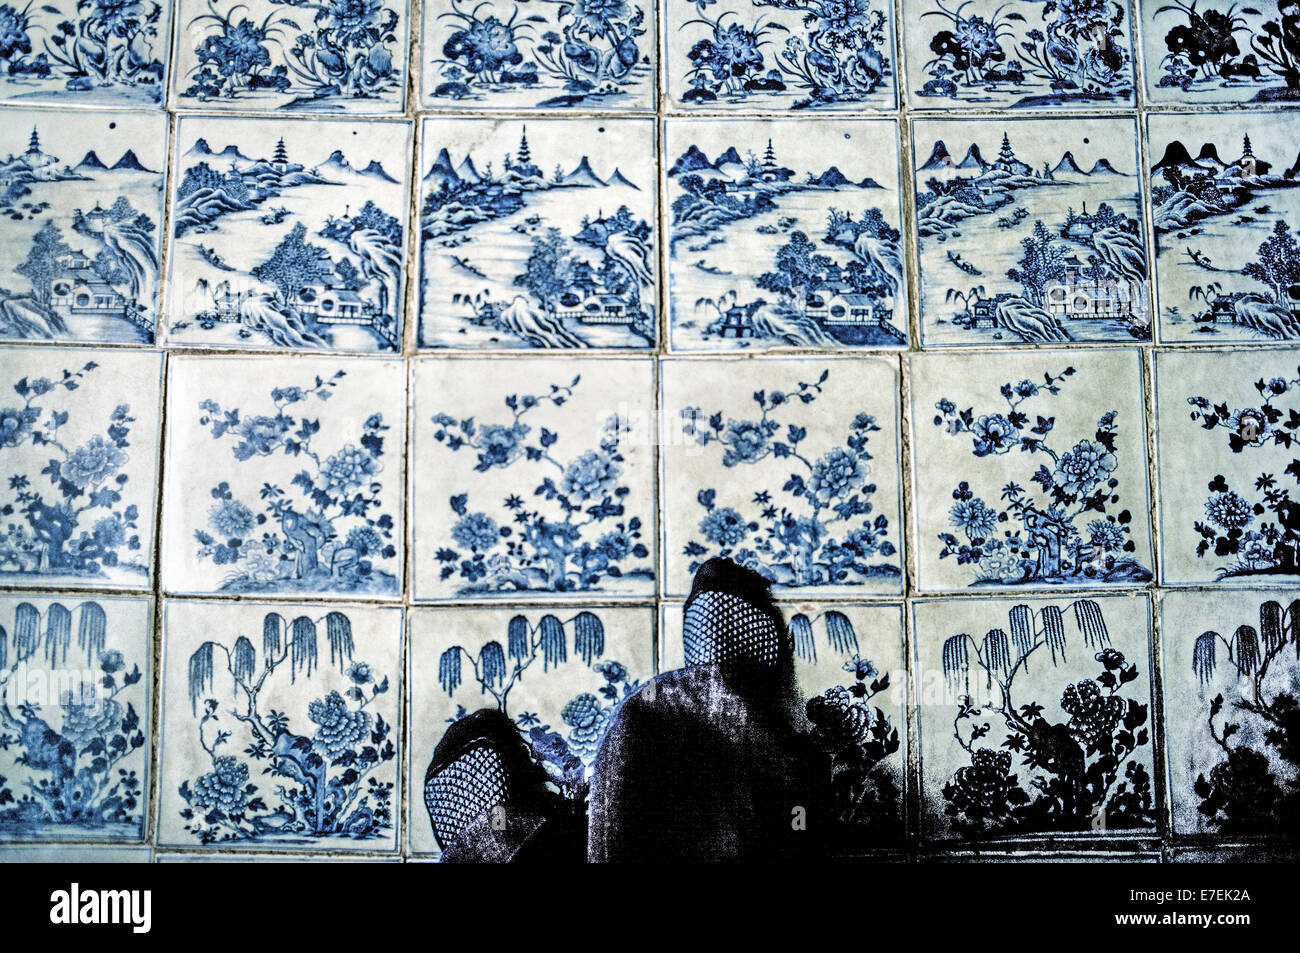 Visitors walk on blue hand-painted ceramic floor tiles brought from China in the 18th Century to the Paradesi Synagogue that was originally built in 1568 for the Jewish community in Kochi (Cochin) in Kerala state, India.  It is one of the oldest functioning synagogues in the world and welcomes visitors to view its other historical treasures that include a teak ark with scrolls of the Torah and gold and silver crowns, the brass-railed pulpit, and glass chandeliers and lamps imported in the 1800s from Europe. Visitors are expected to enter the synagogue without footwear. Photographed in 1974. Stock Photo